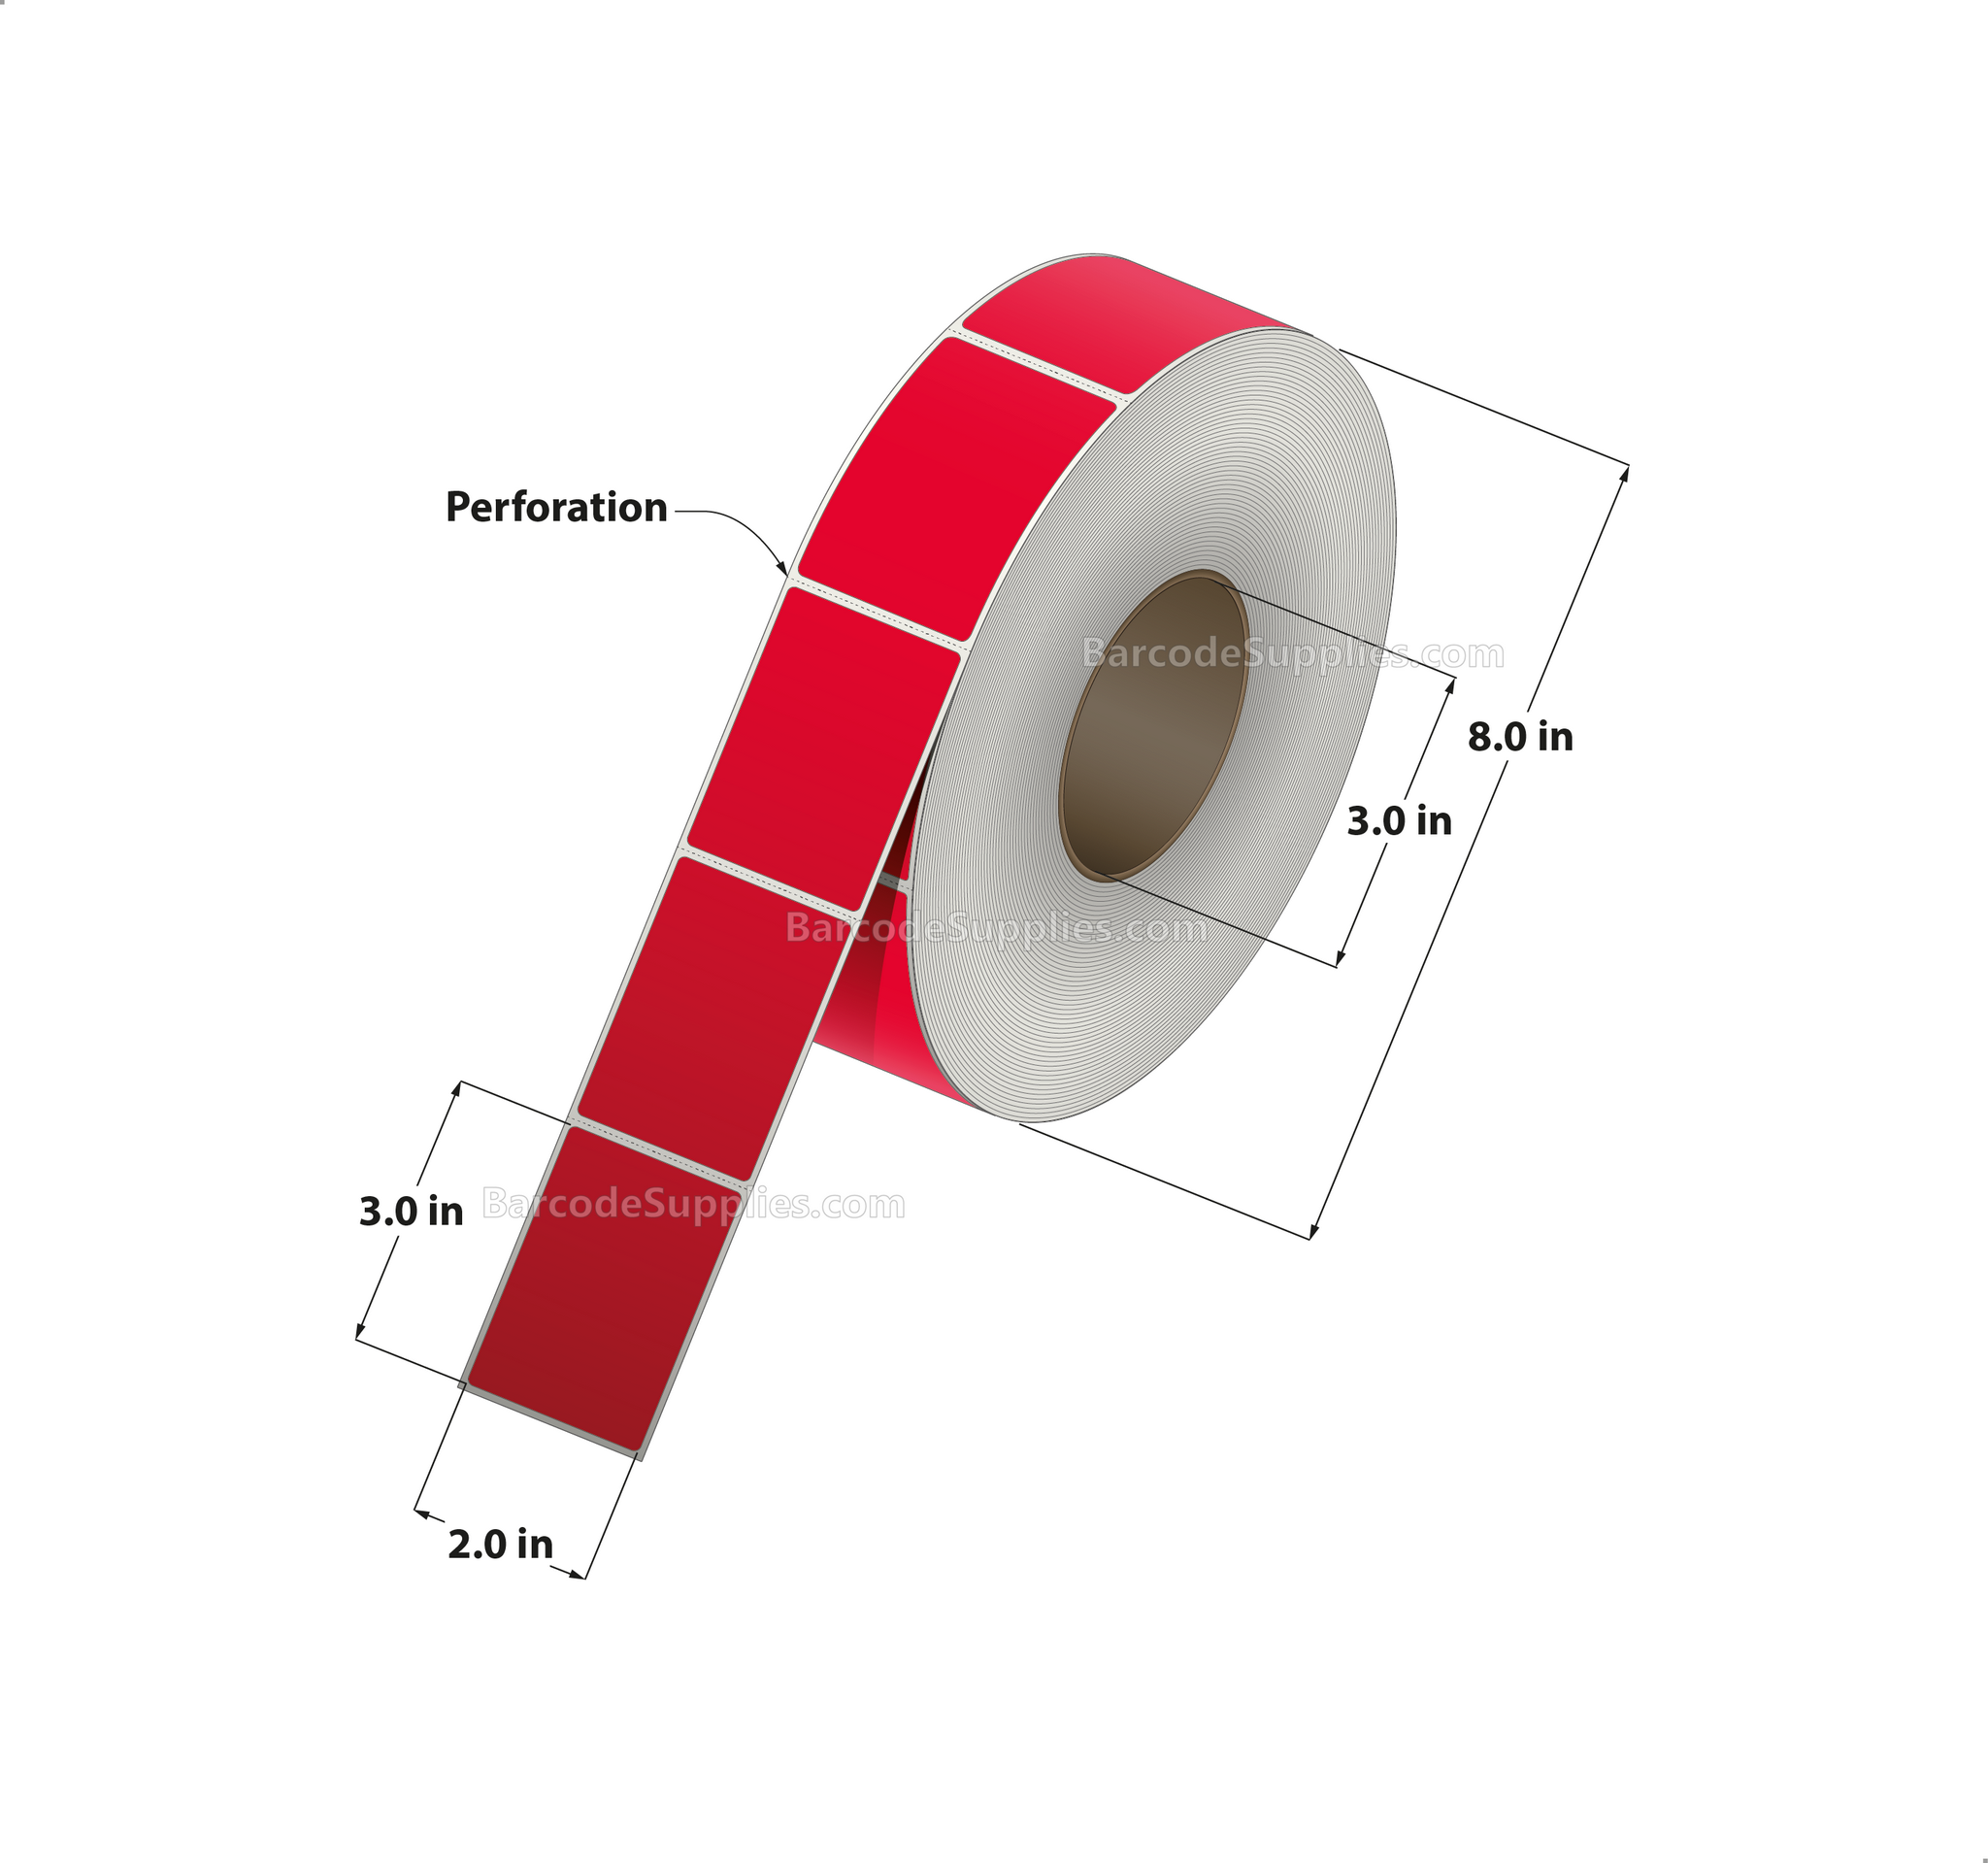 2 x 3 Thermal Transfer 032 Red Labels With Permanent Adhesive - Perforated - 1900 Labels Per Roll - Carton Of 8 Rolls - 15200 Labels Total - MPN: RFC-2-3-1900-RD